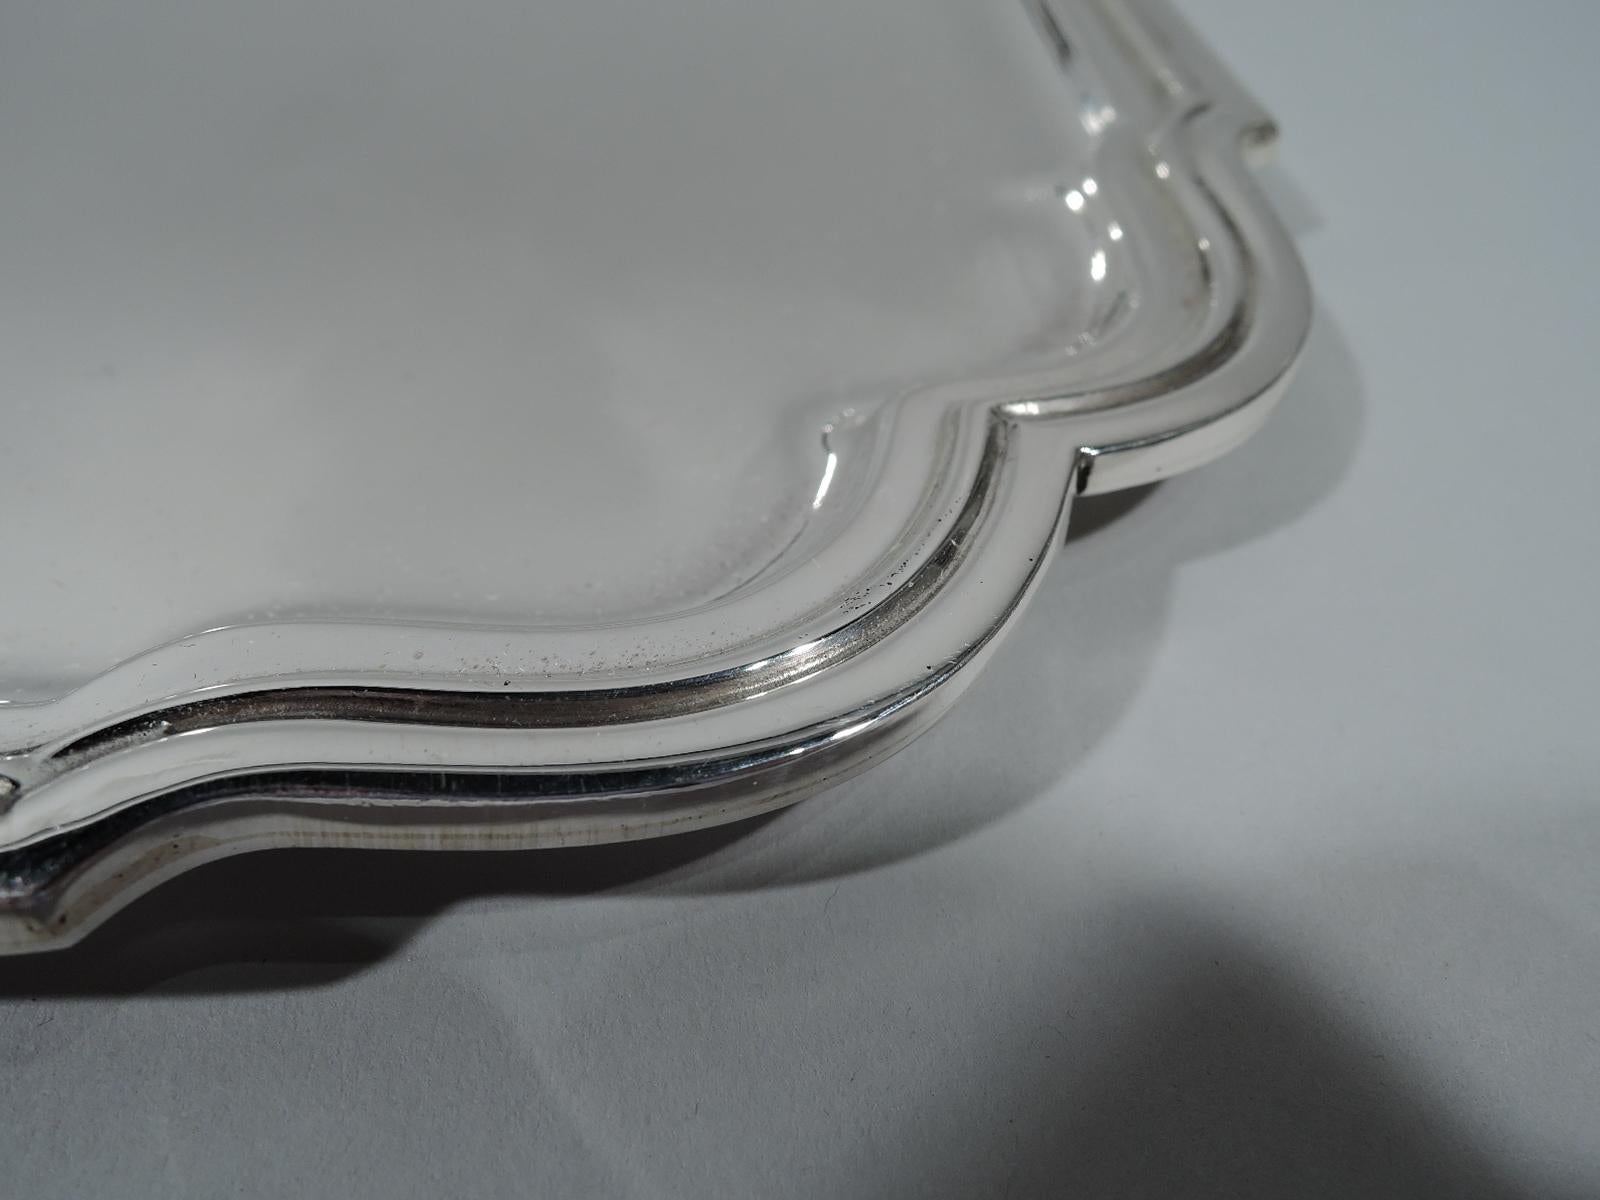 Modern sterling silver serving tray. Made by Tiffany & Co. in New York. Square with molded rim and double-scrolled corners. Hallmark includes postwar pattern no. 25082. Heavy weight: 47 troy ounces.